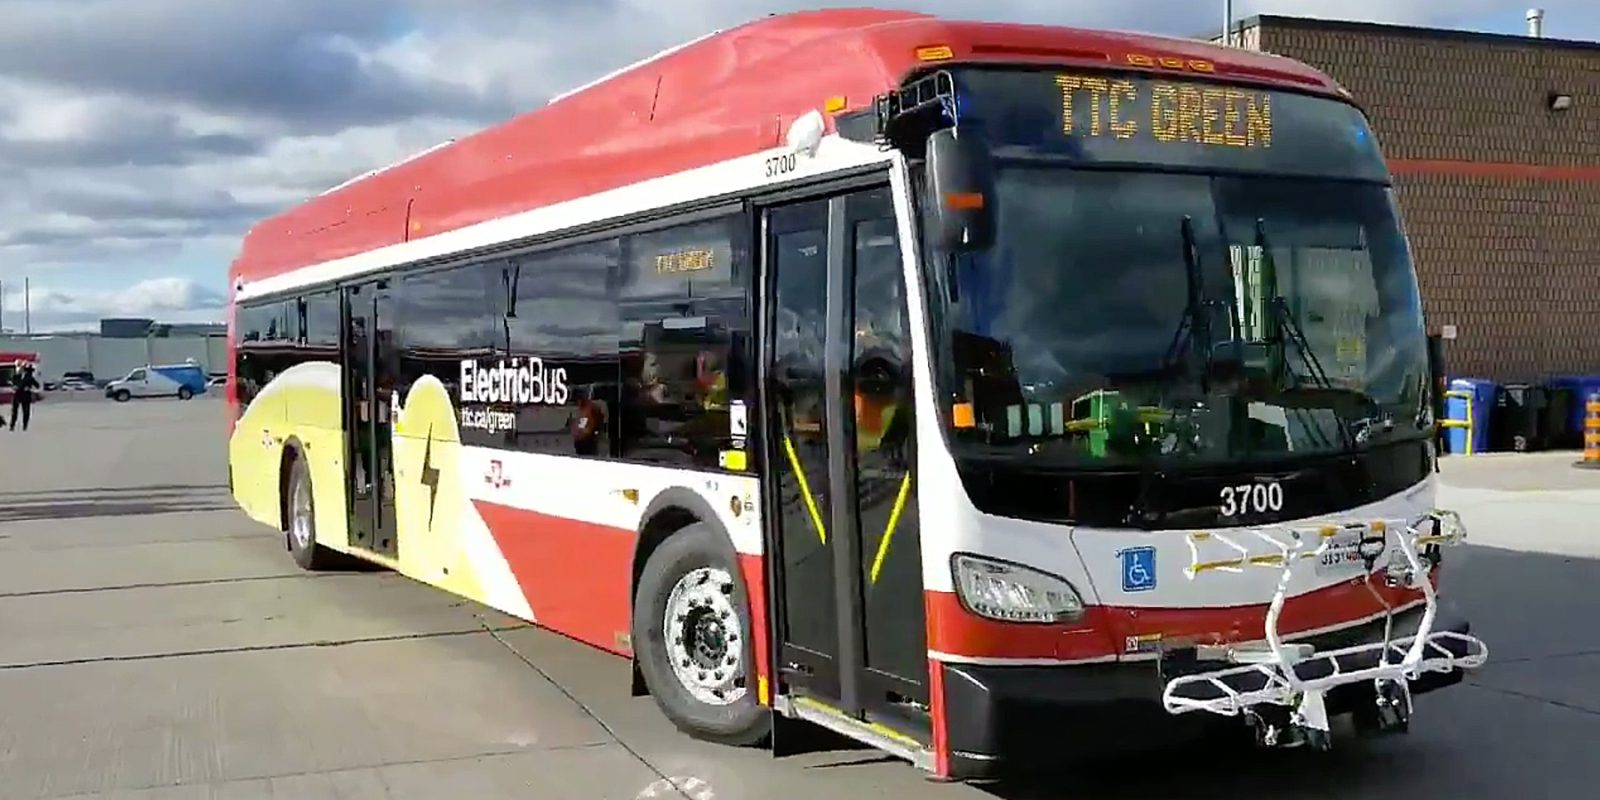 Toronto's first electric bus has hit the streets